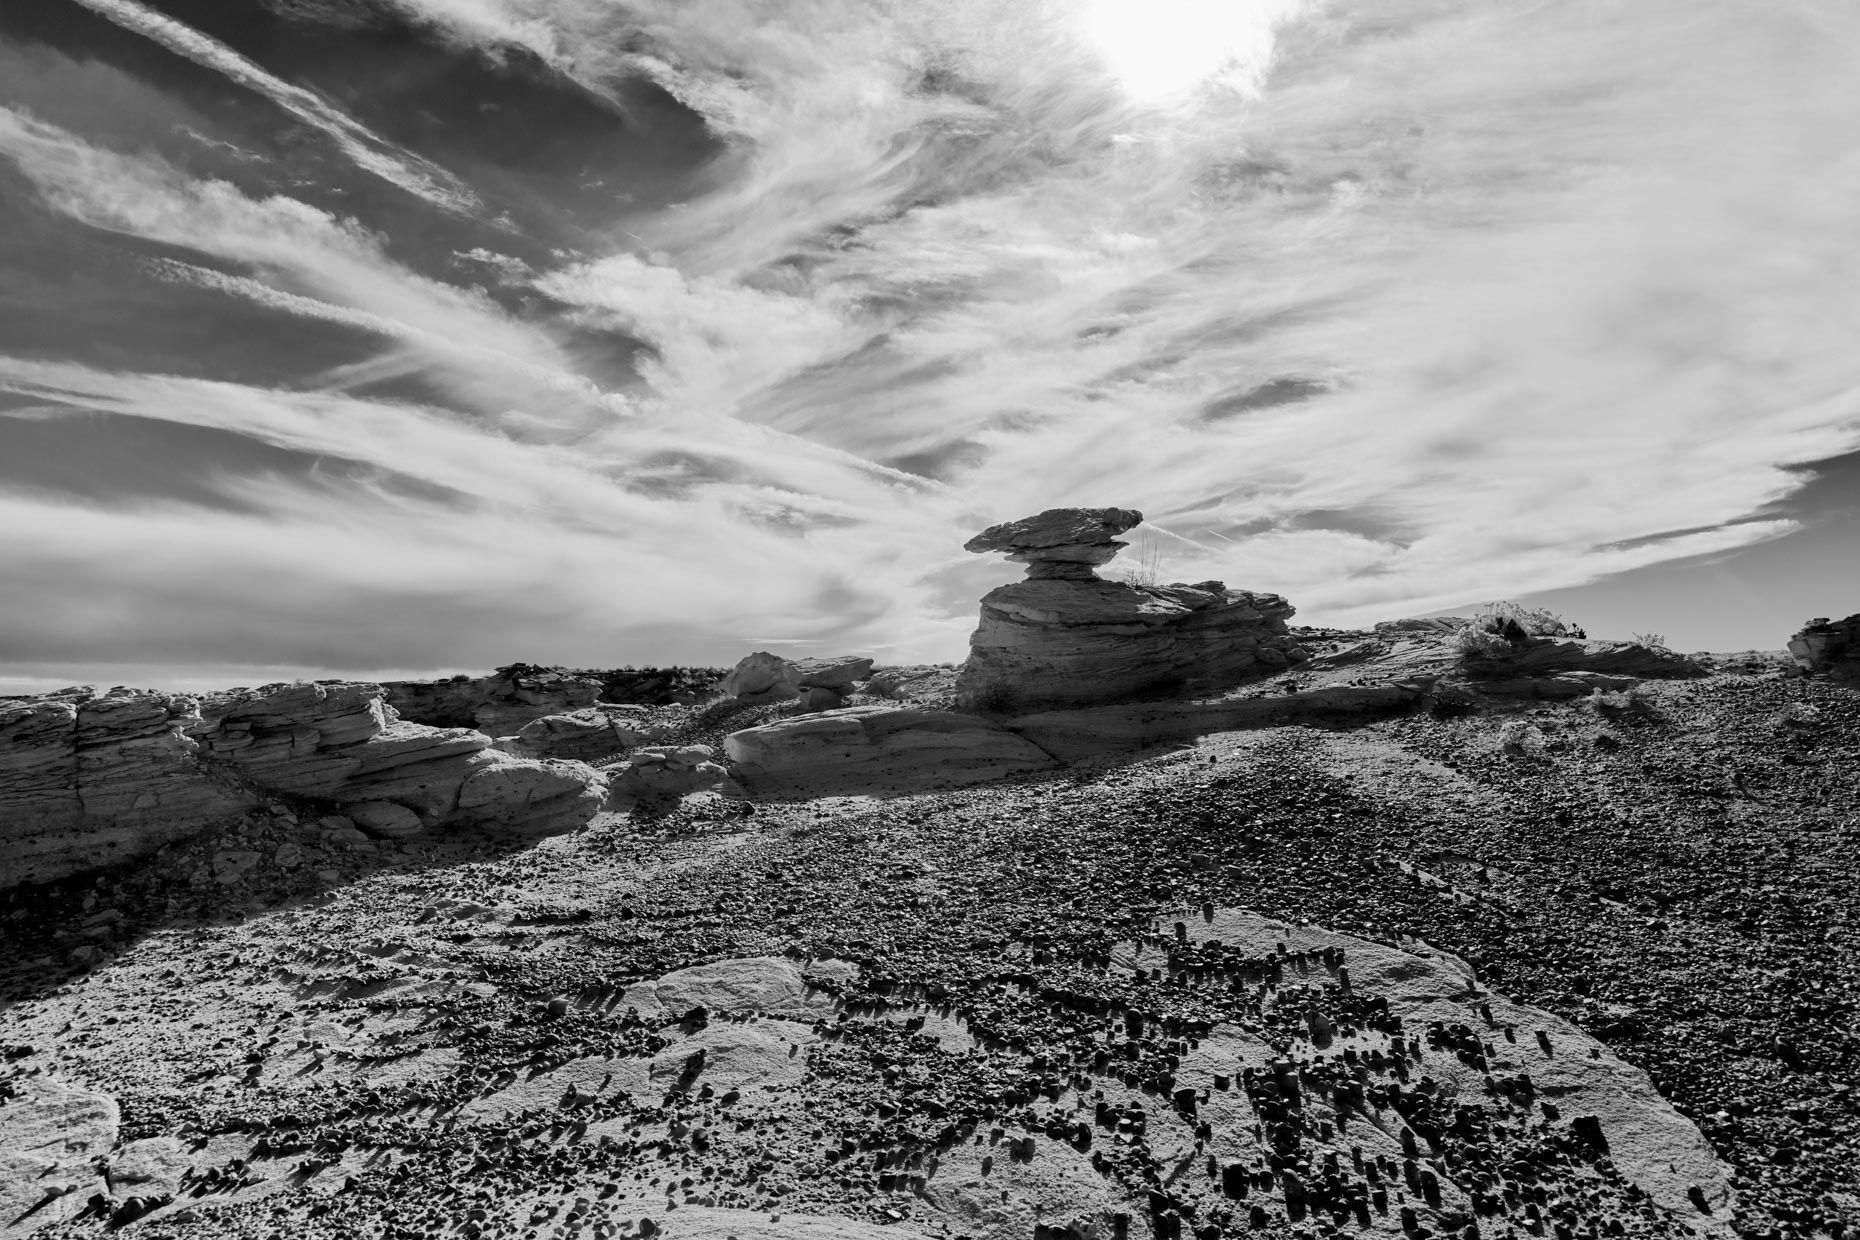 The Sonsela Member in the Petrified National Forest-b&w the upper Flattops One Bed, which consists of a thick cliff-forming brown, cross-bedded sandstone